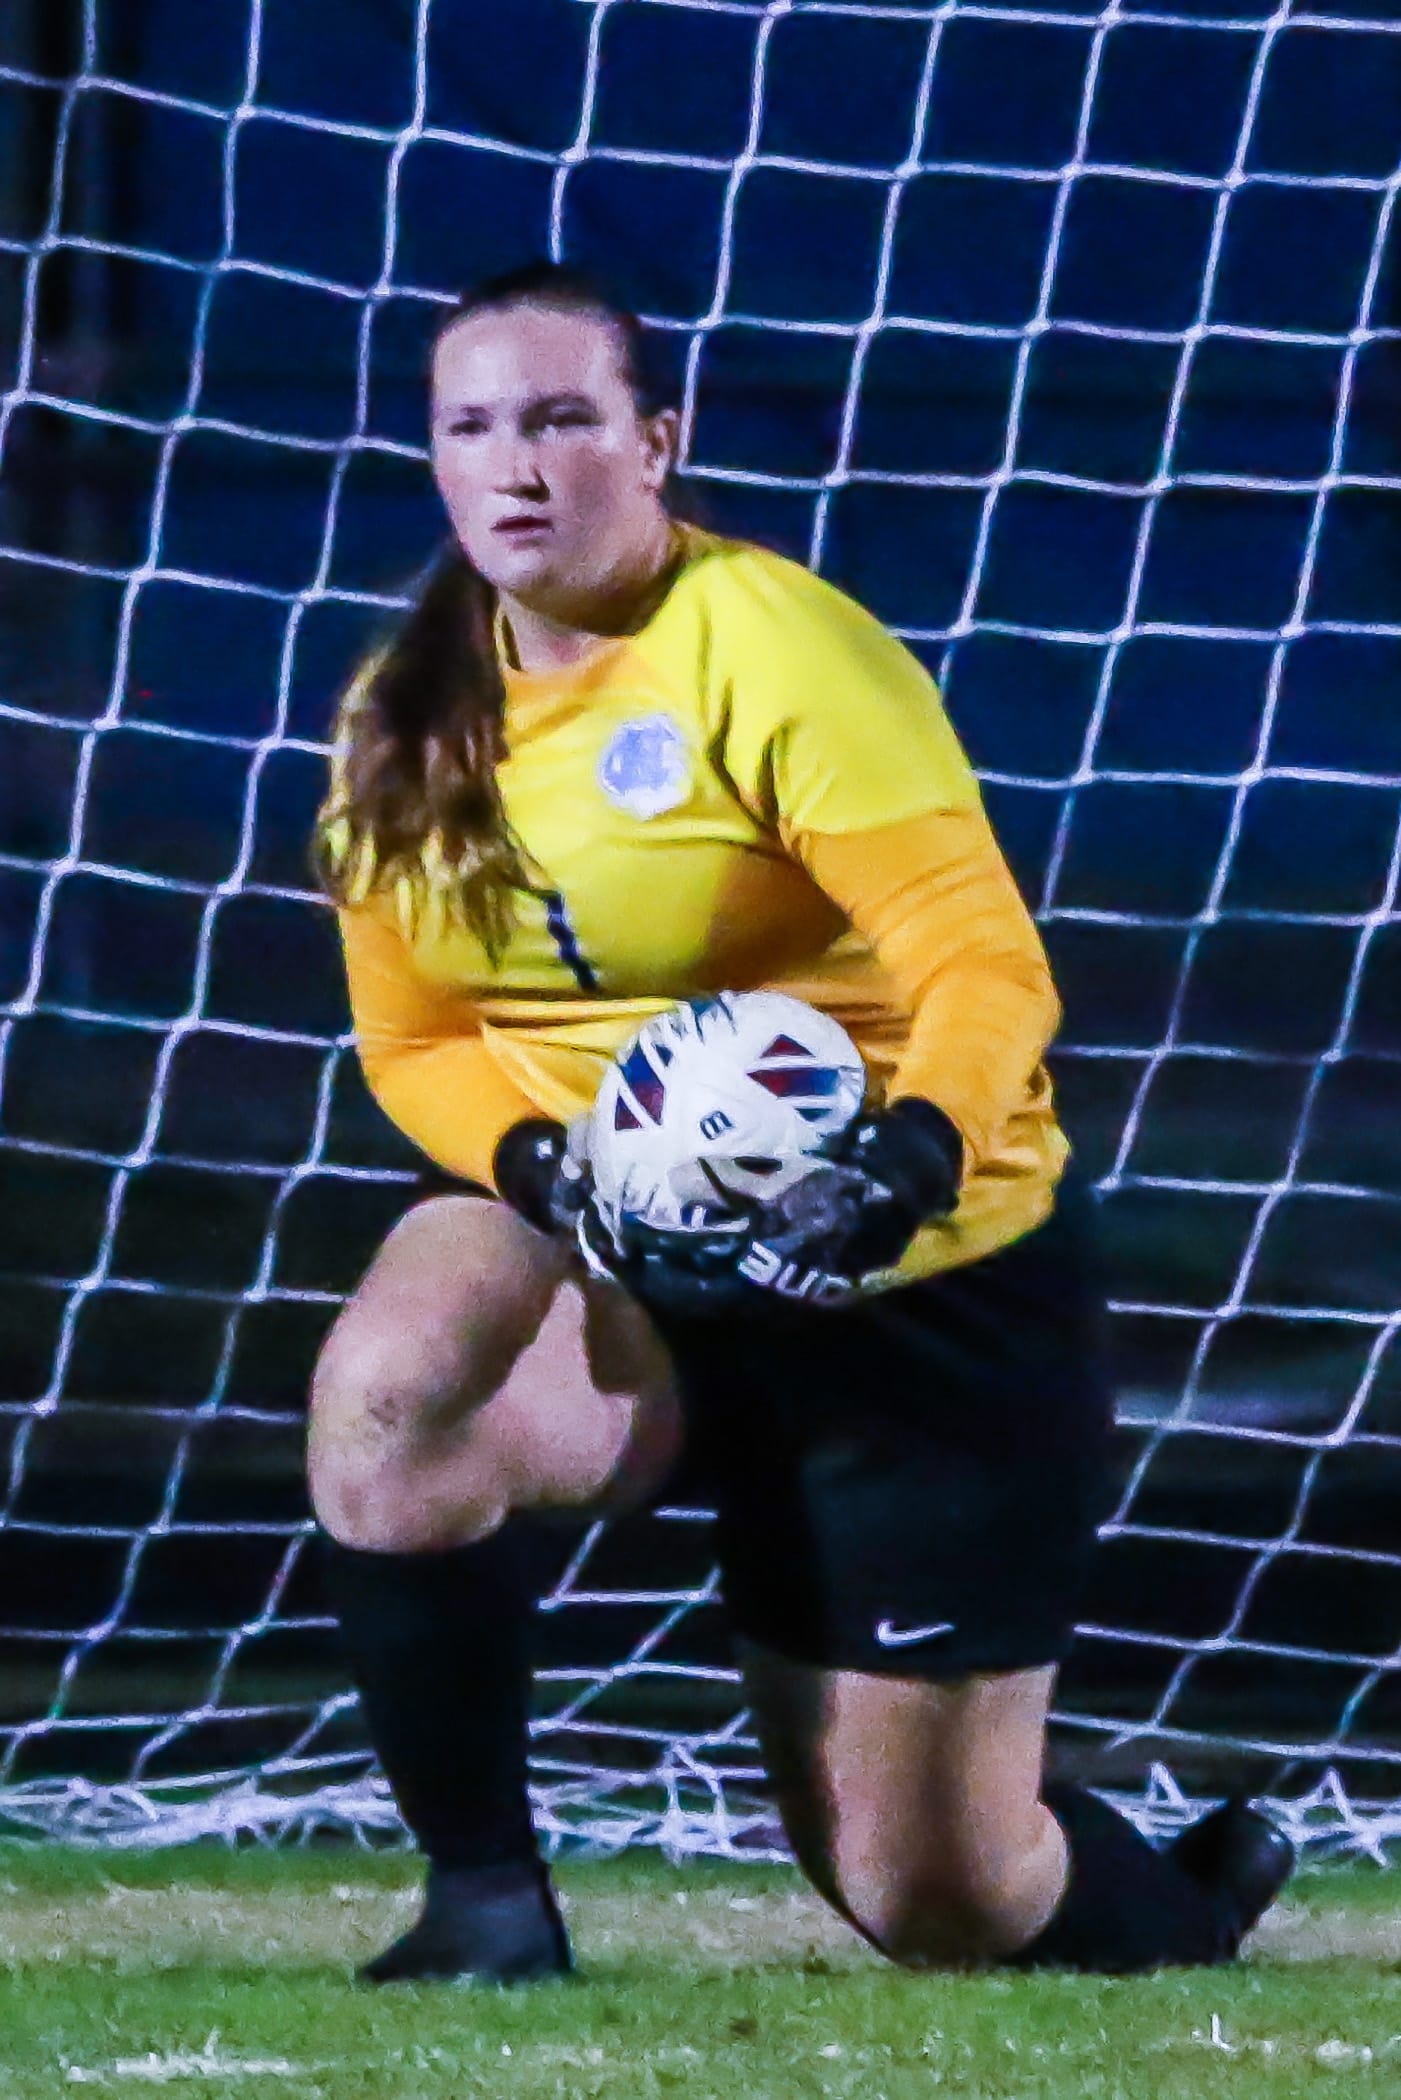 Springstead Goalie #1 name unknown protects her territory against the Sharks Wednesday night 12/14/22. Photo by Cheryl Clanton.